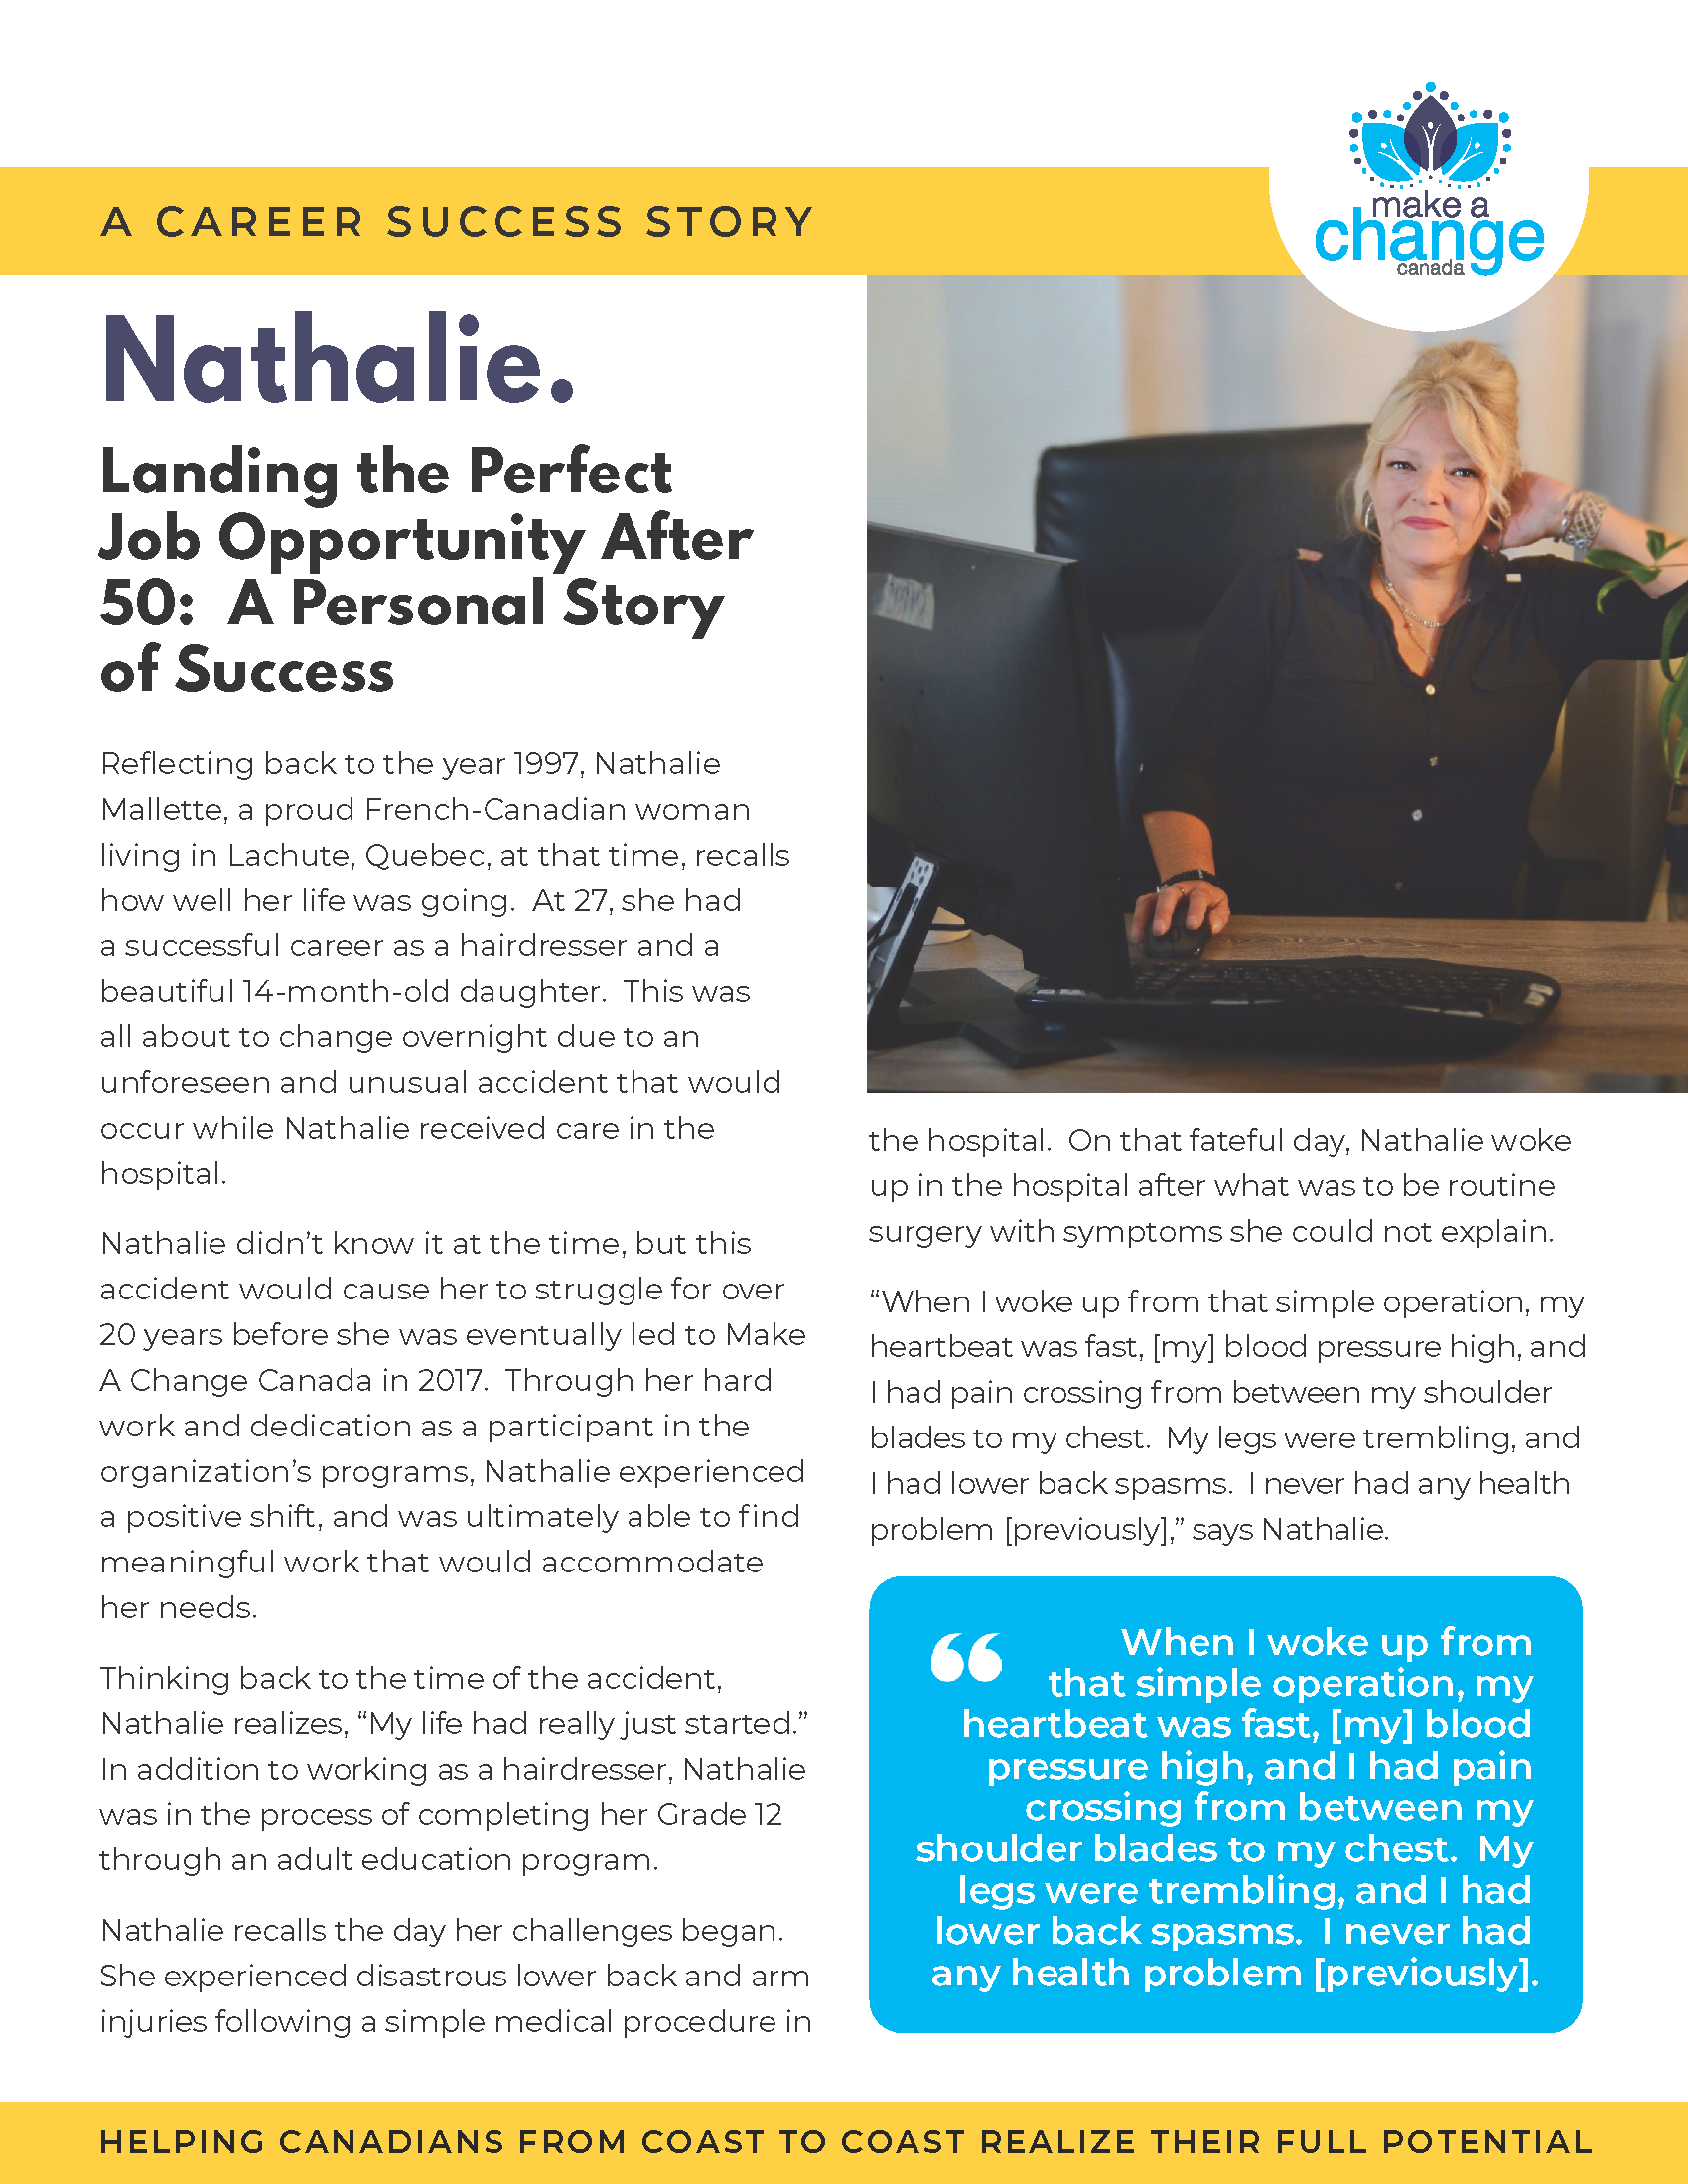 nathalie-a-career-success-story_Page_1